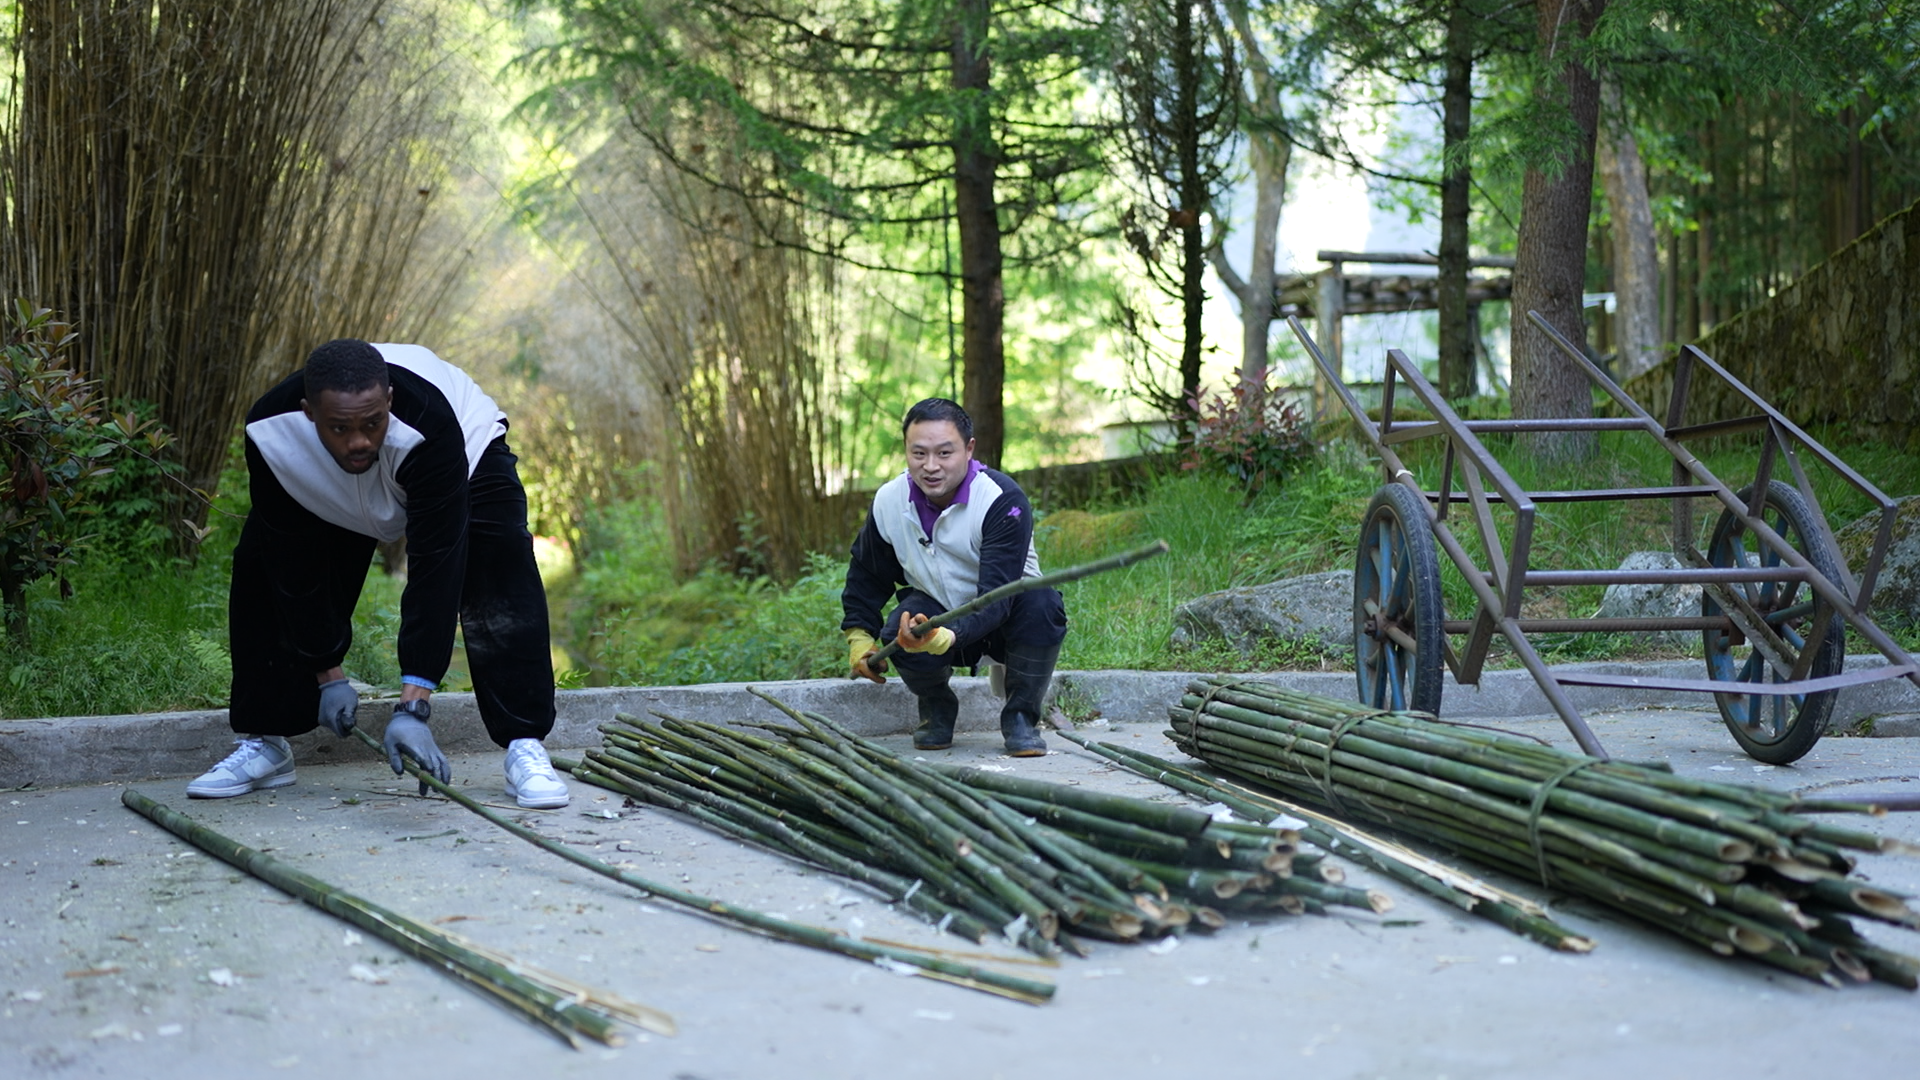 Michael Harford (L), who is from Nigeria, learns to prepare bamboos for the giant pandas at the China Conservation and Research Center for Giant Panda in southwest China's Sichuan Province. /CMG